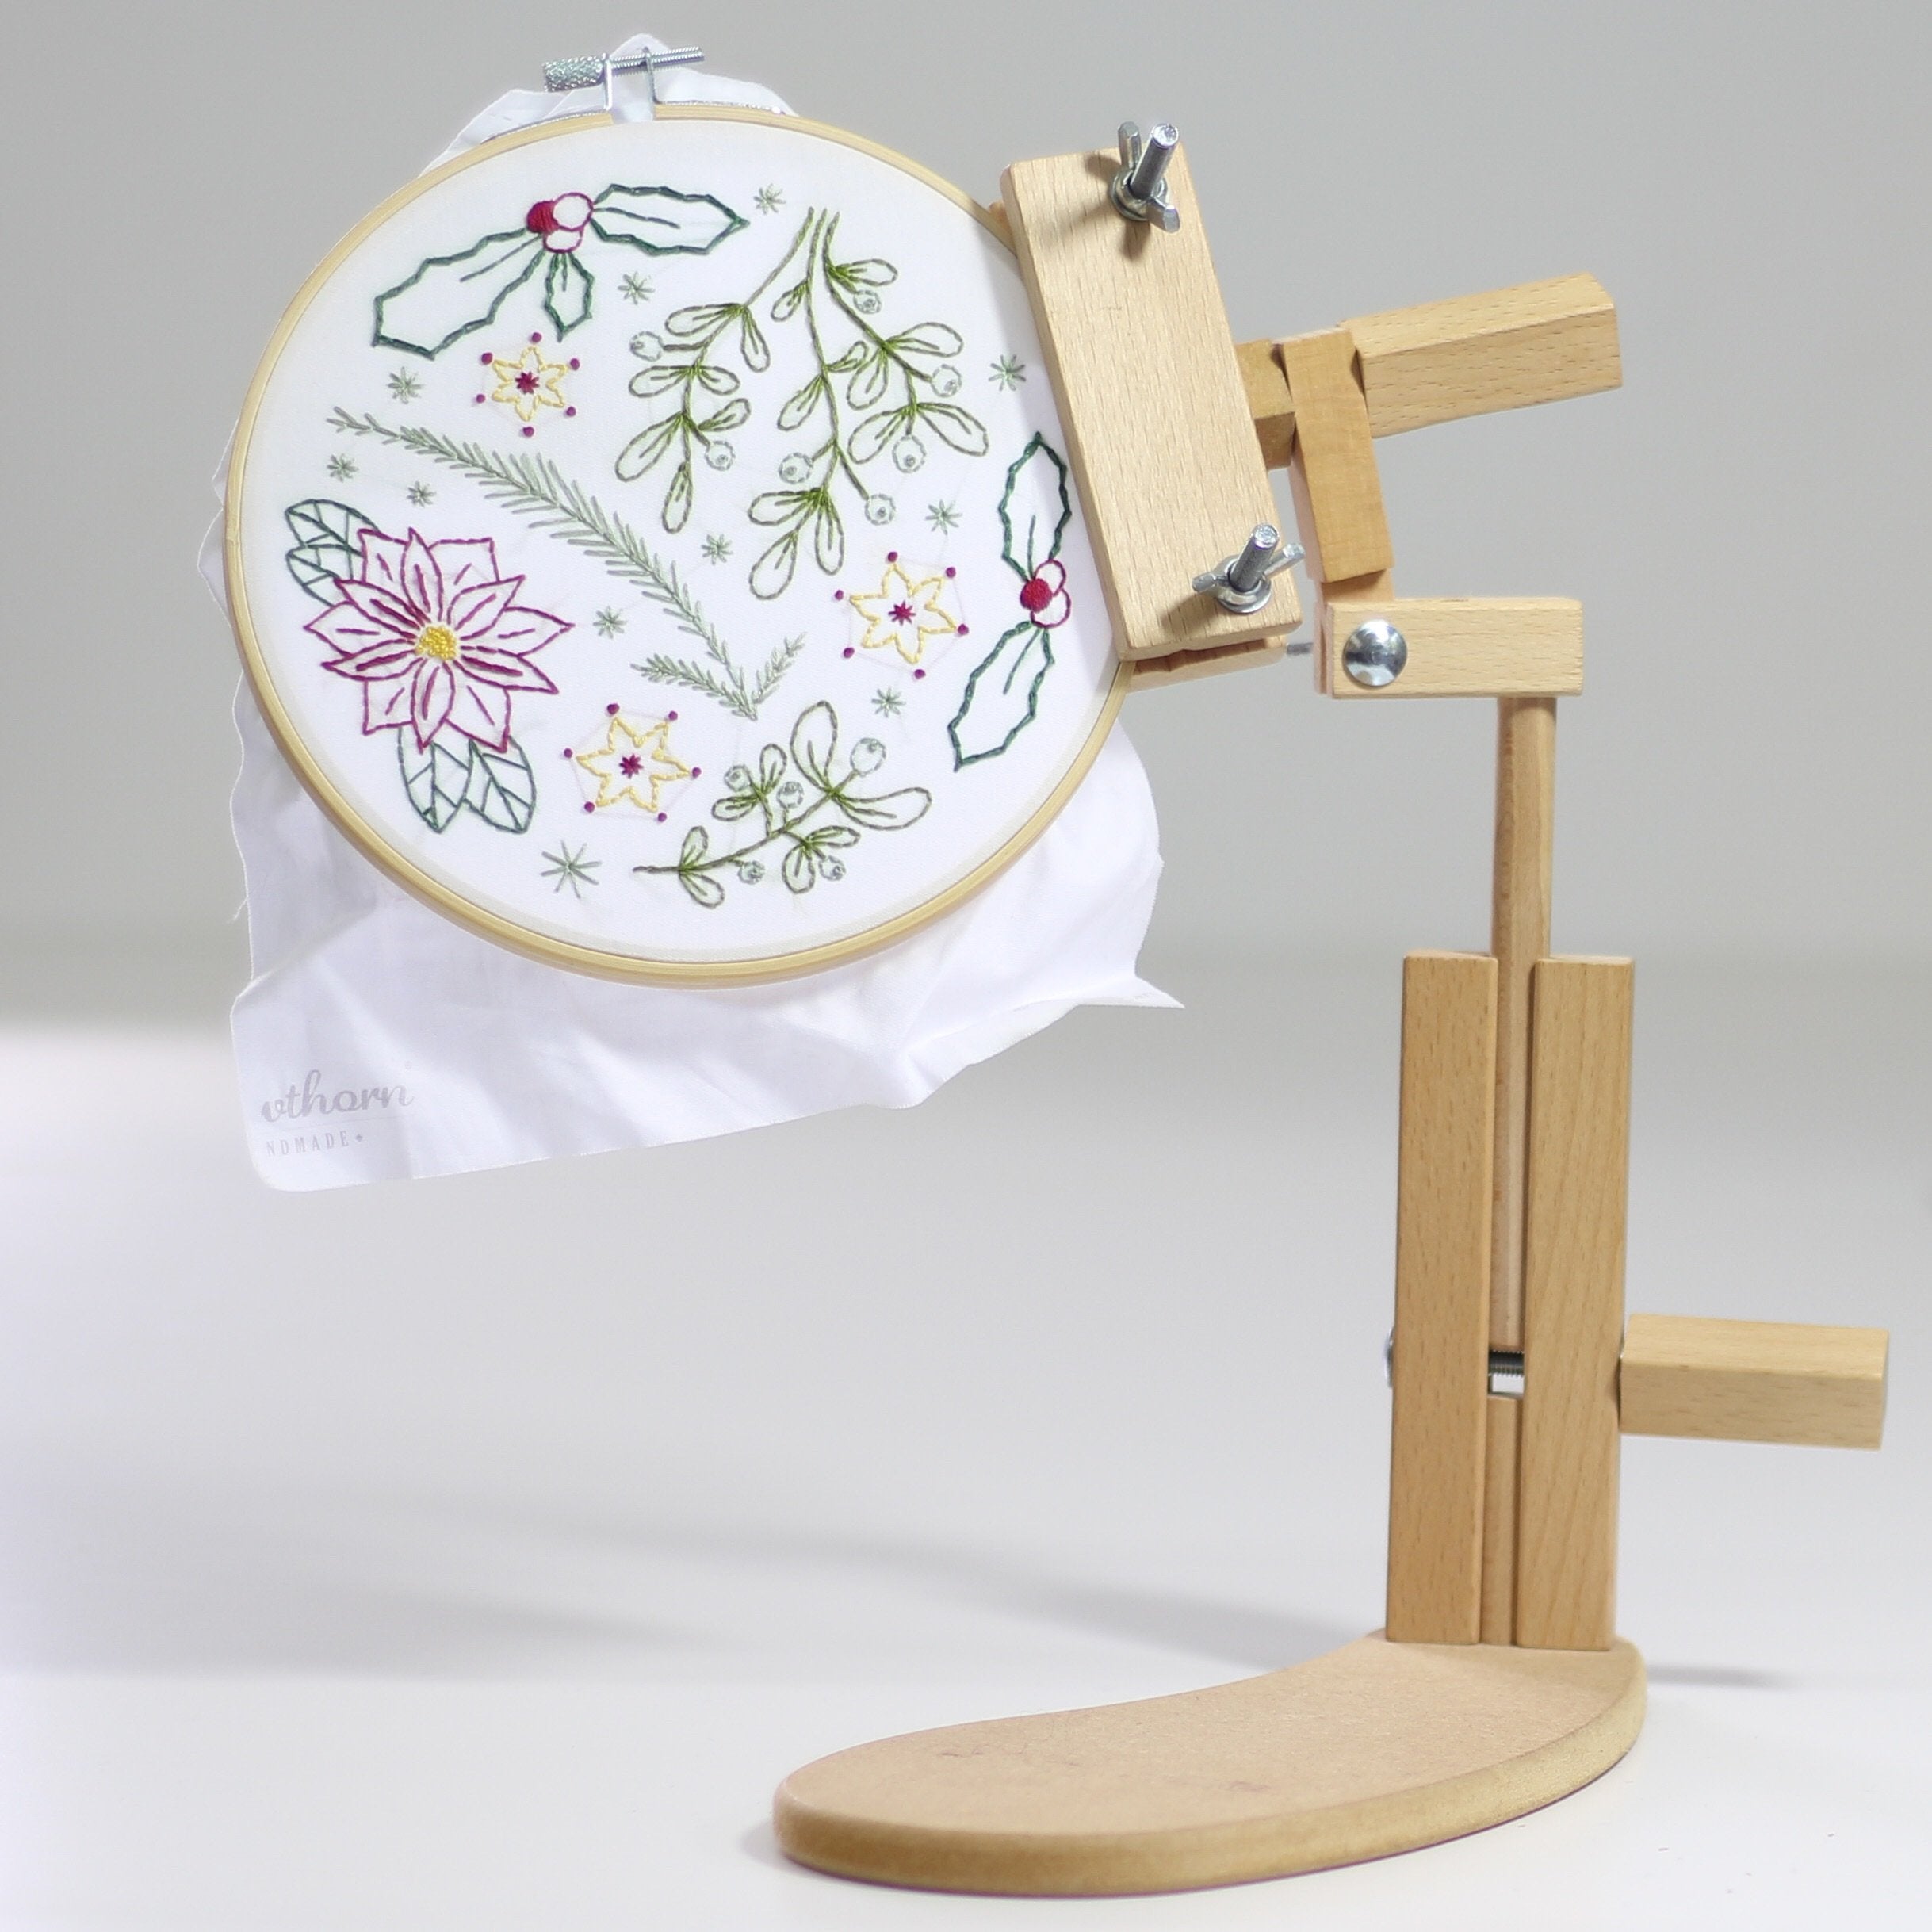 Embroidery Hoop Holder :: one handed embroidery